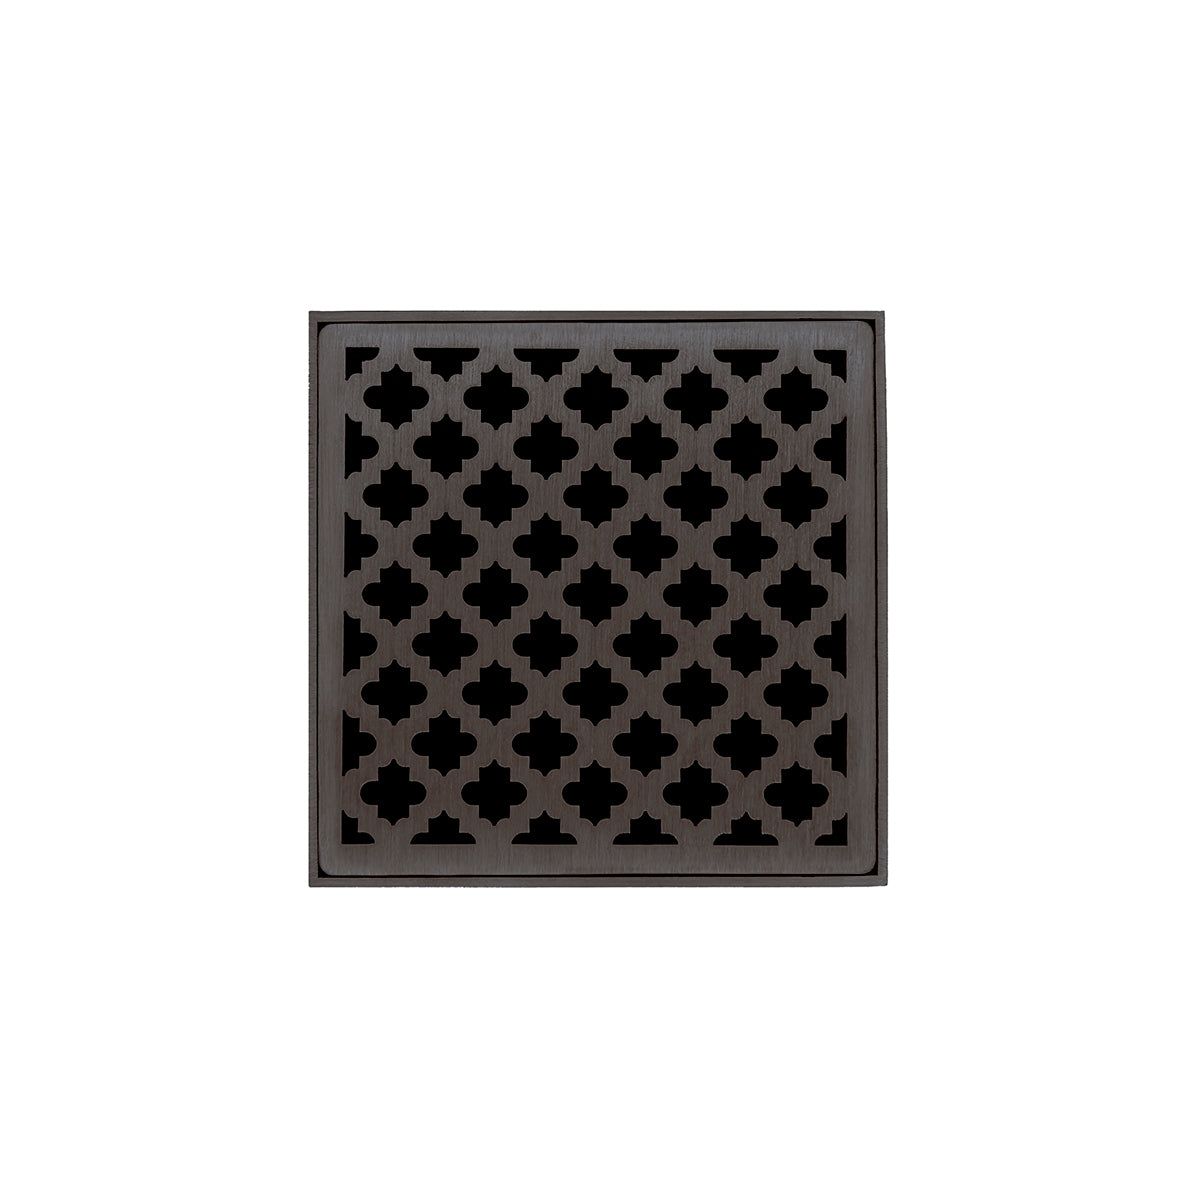 Infinity Drain 5" x 5" MD 5 Premium Center Drain Kit with Moor Pattern Decorative Plate with ABS Drain Body, 2" Outlet